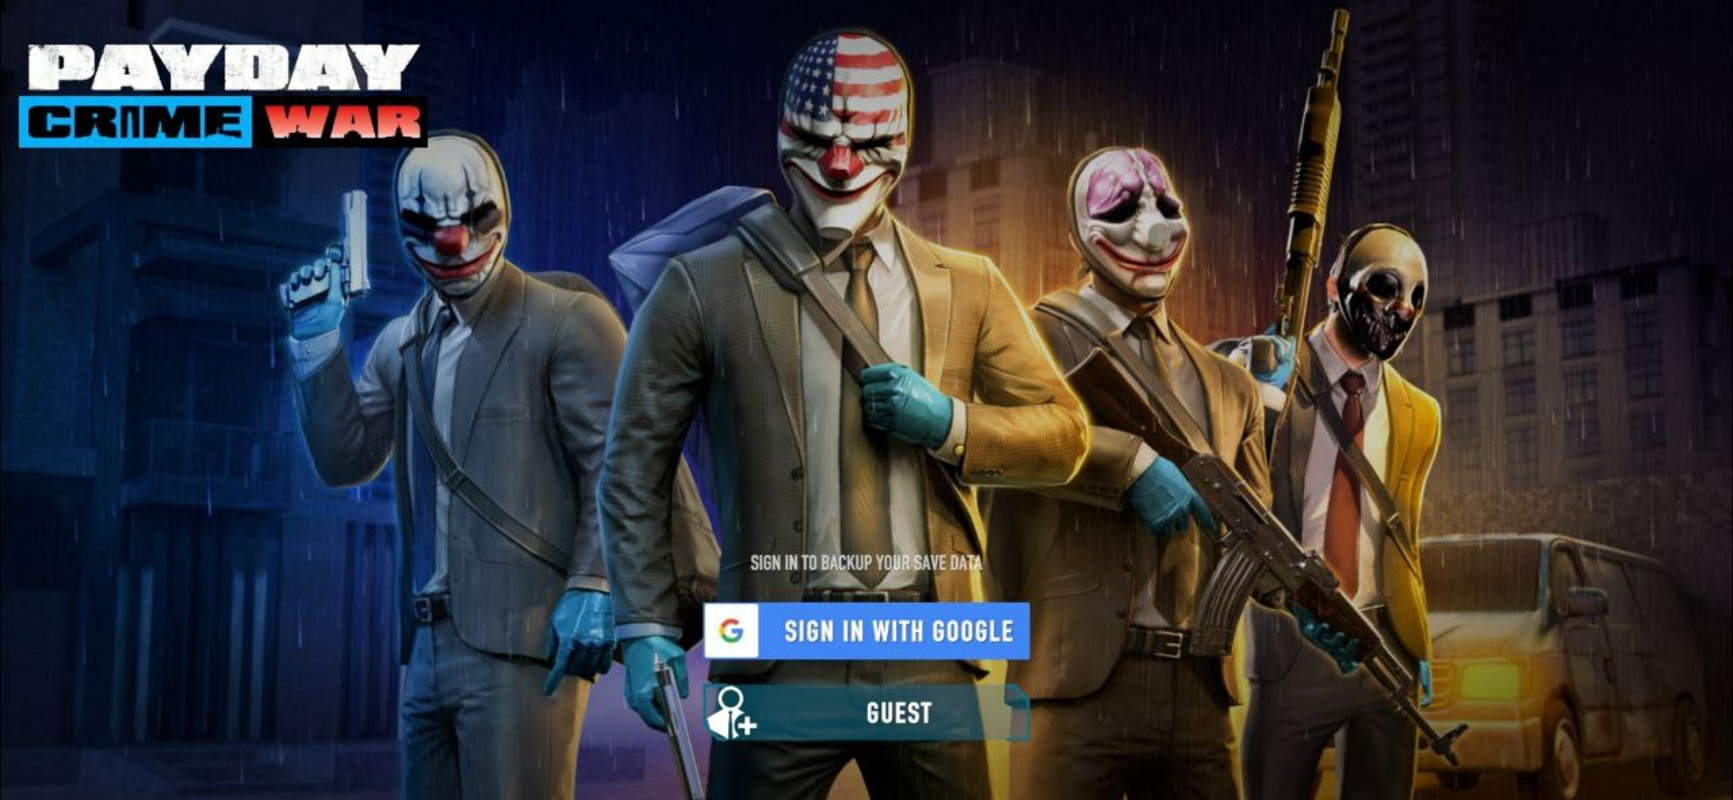 PAYDAY: Crime War 2023.2.4 APK feature